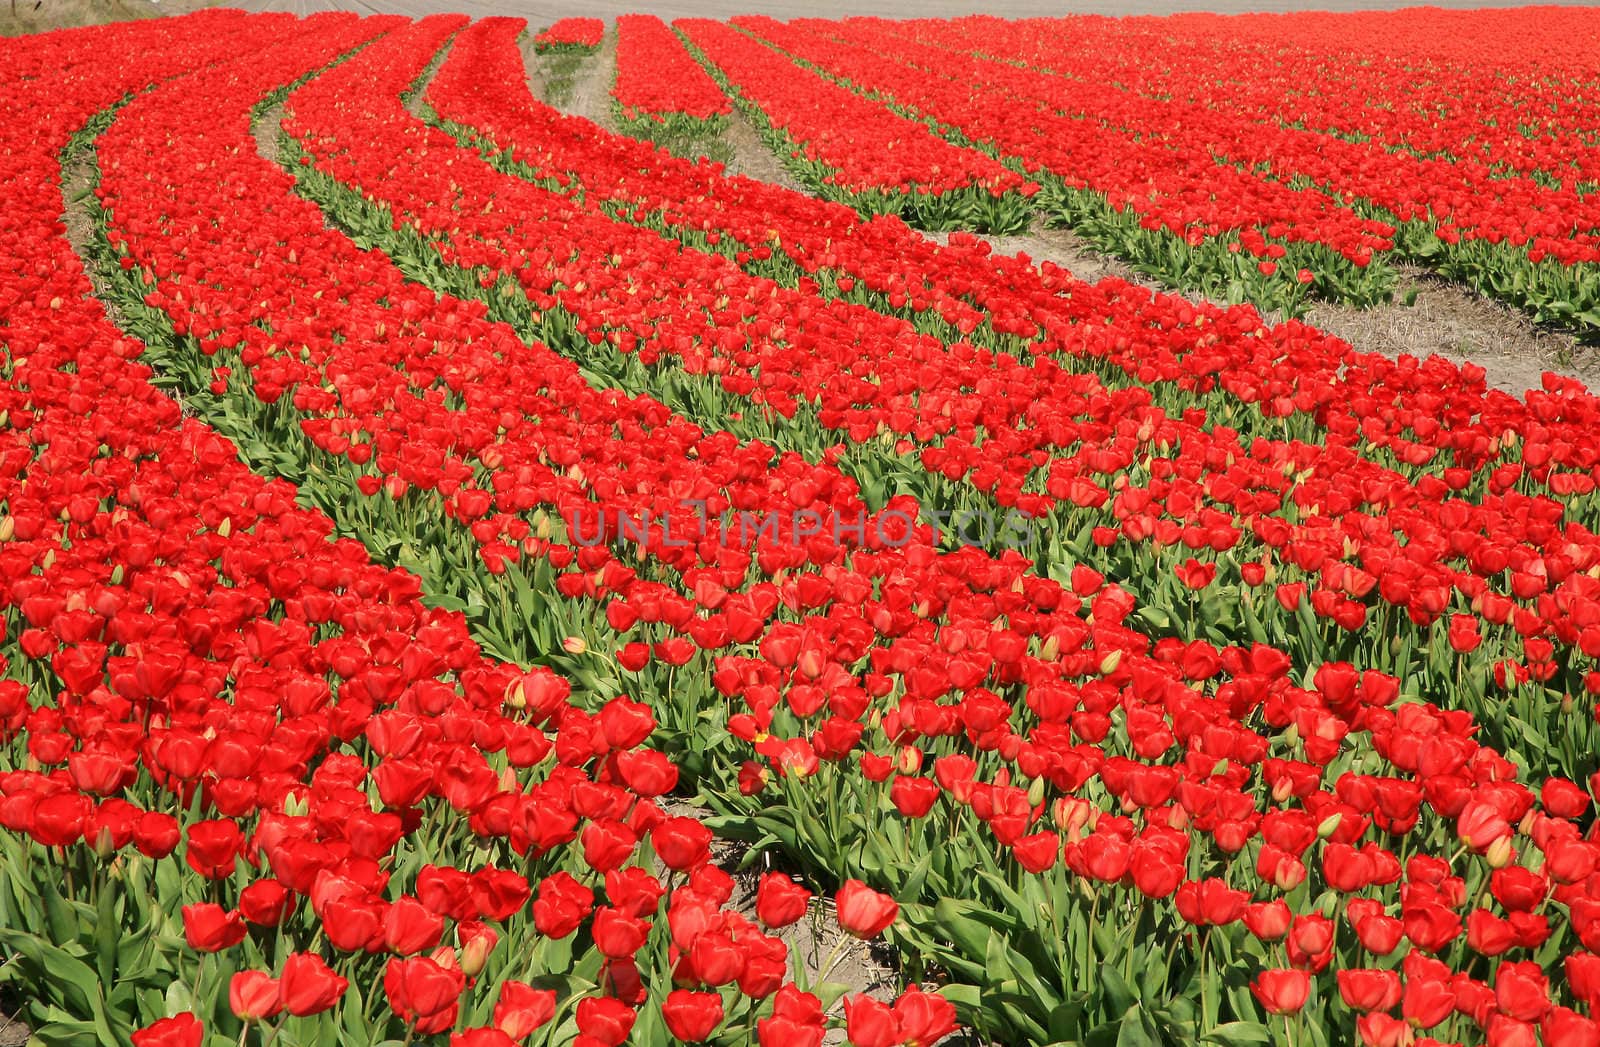 Dutch country –red tulips – view from the top